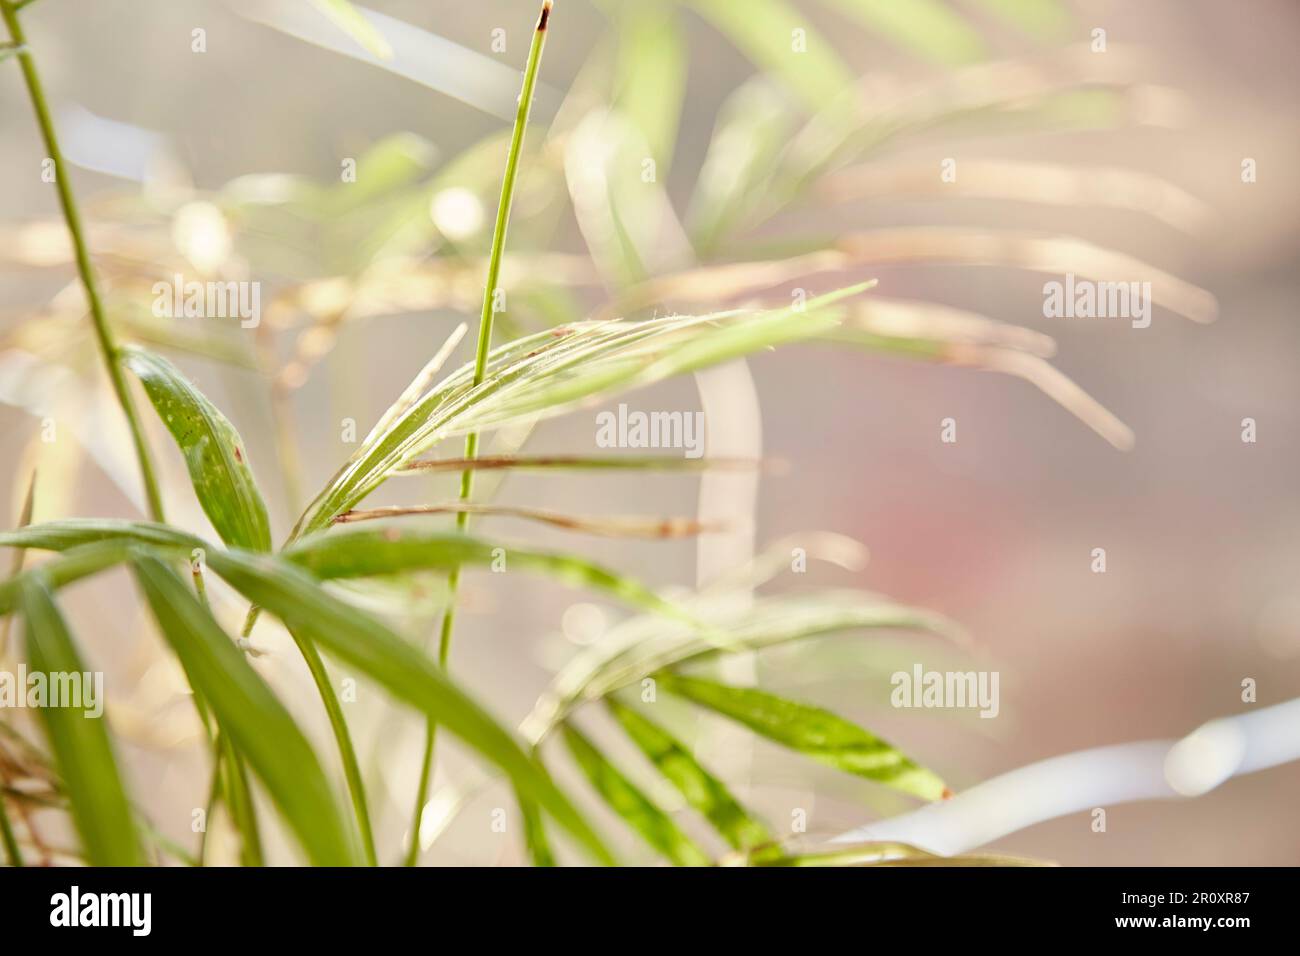 Sick houseplant. Wilt leaves close-up on sunny day. Stock Photo